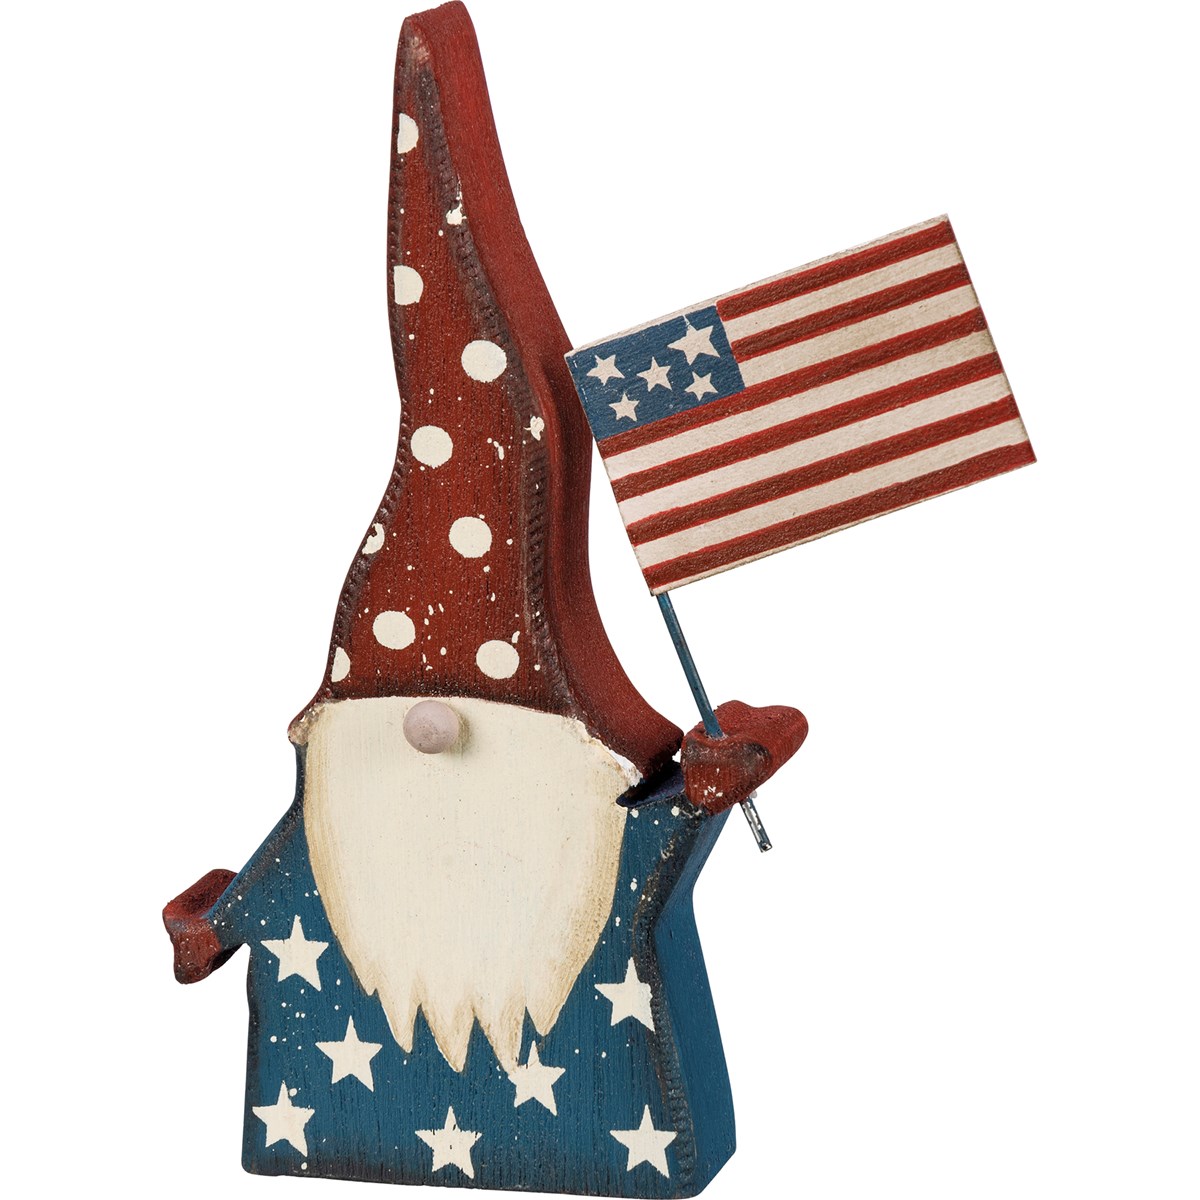 Gnome And American Flag Chunky Sitter - Wood, Metal